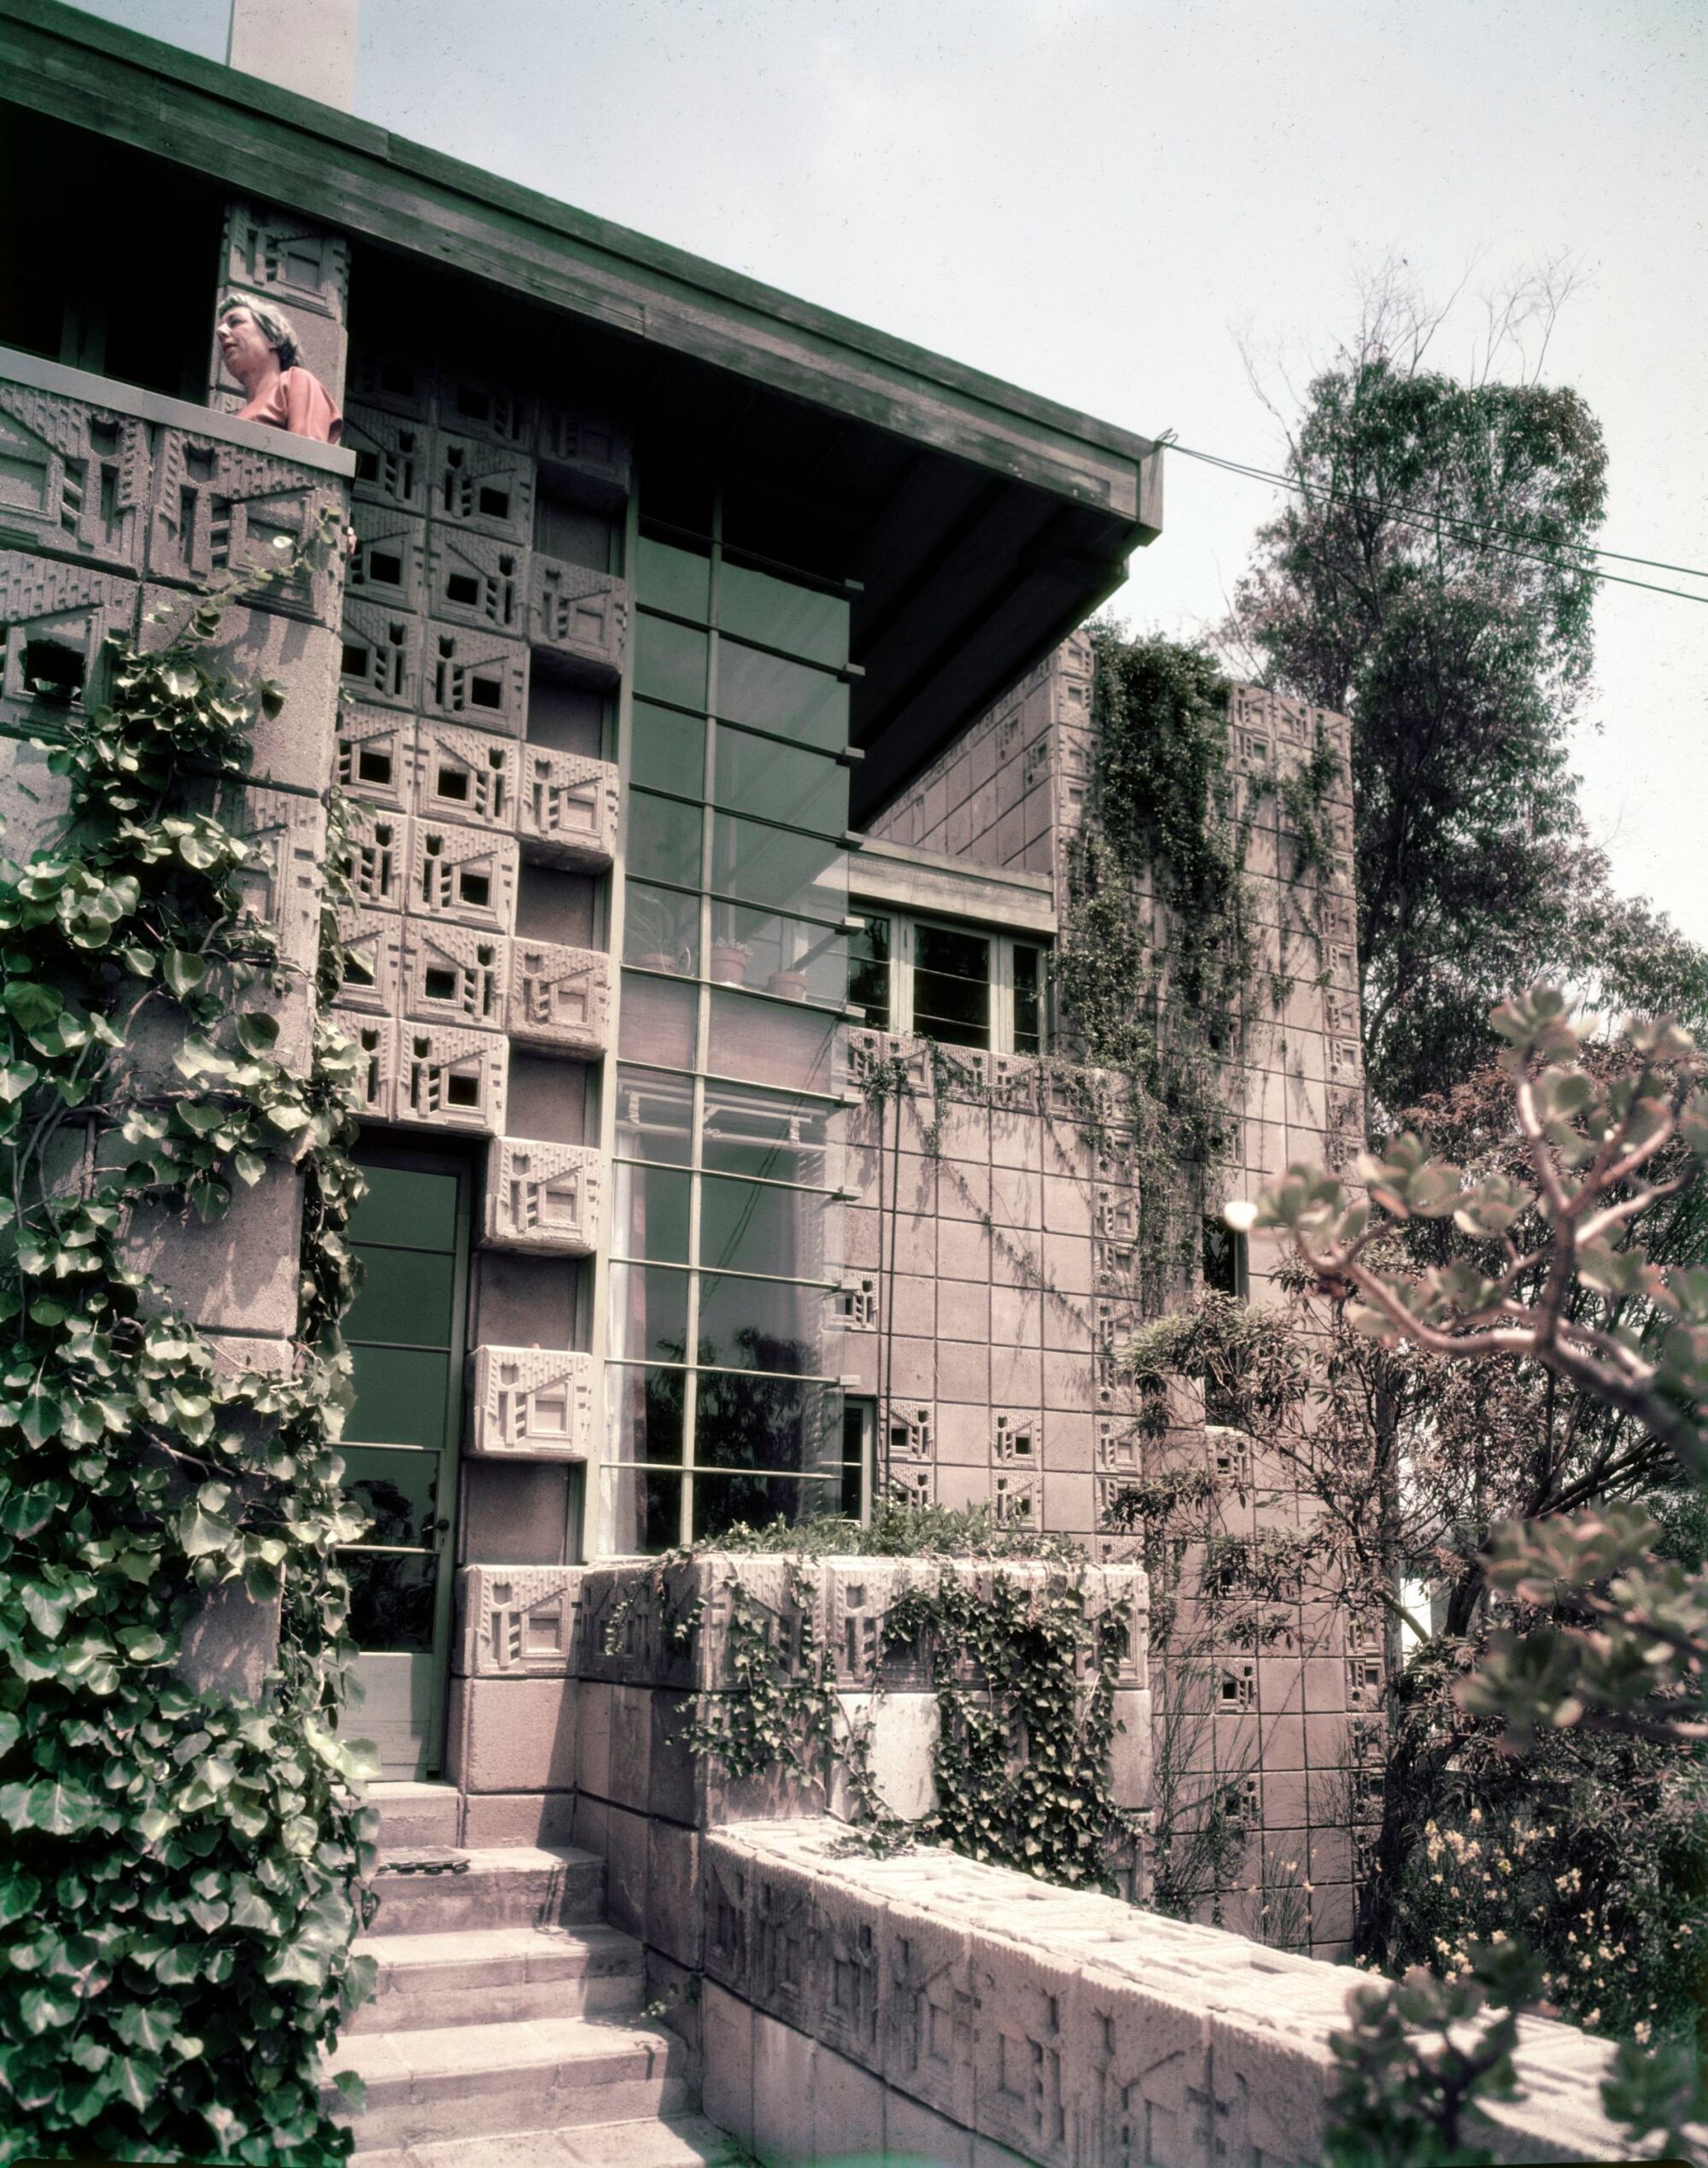 A color image from the 1950s shows the textile blocks and corner windows of the Freeman House's front facade.